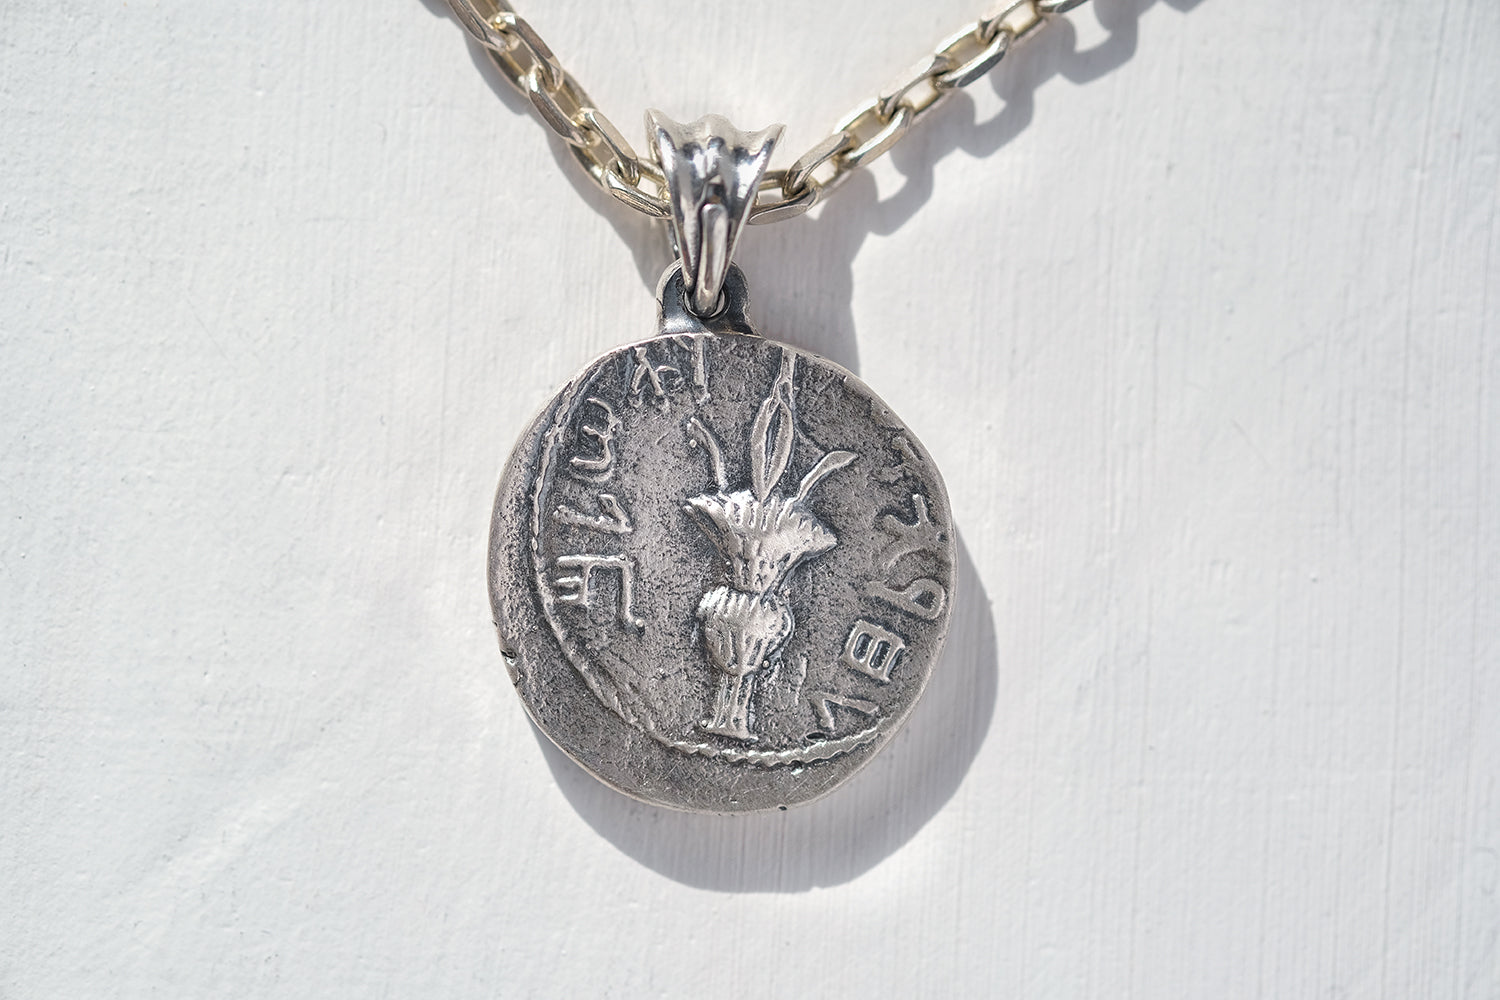 Silver Necklace For Men With A Replica Of A Ancient Jewish Coin Pendant